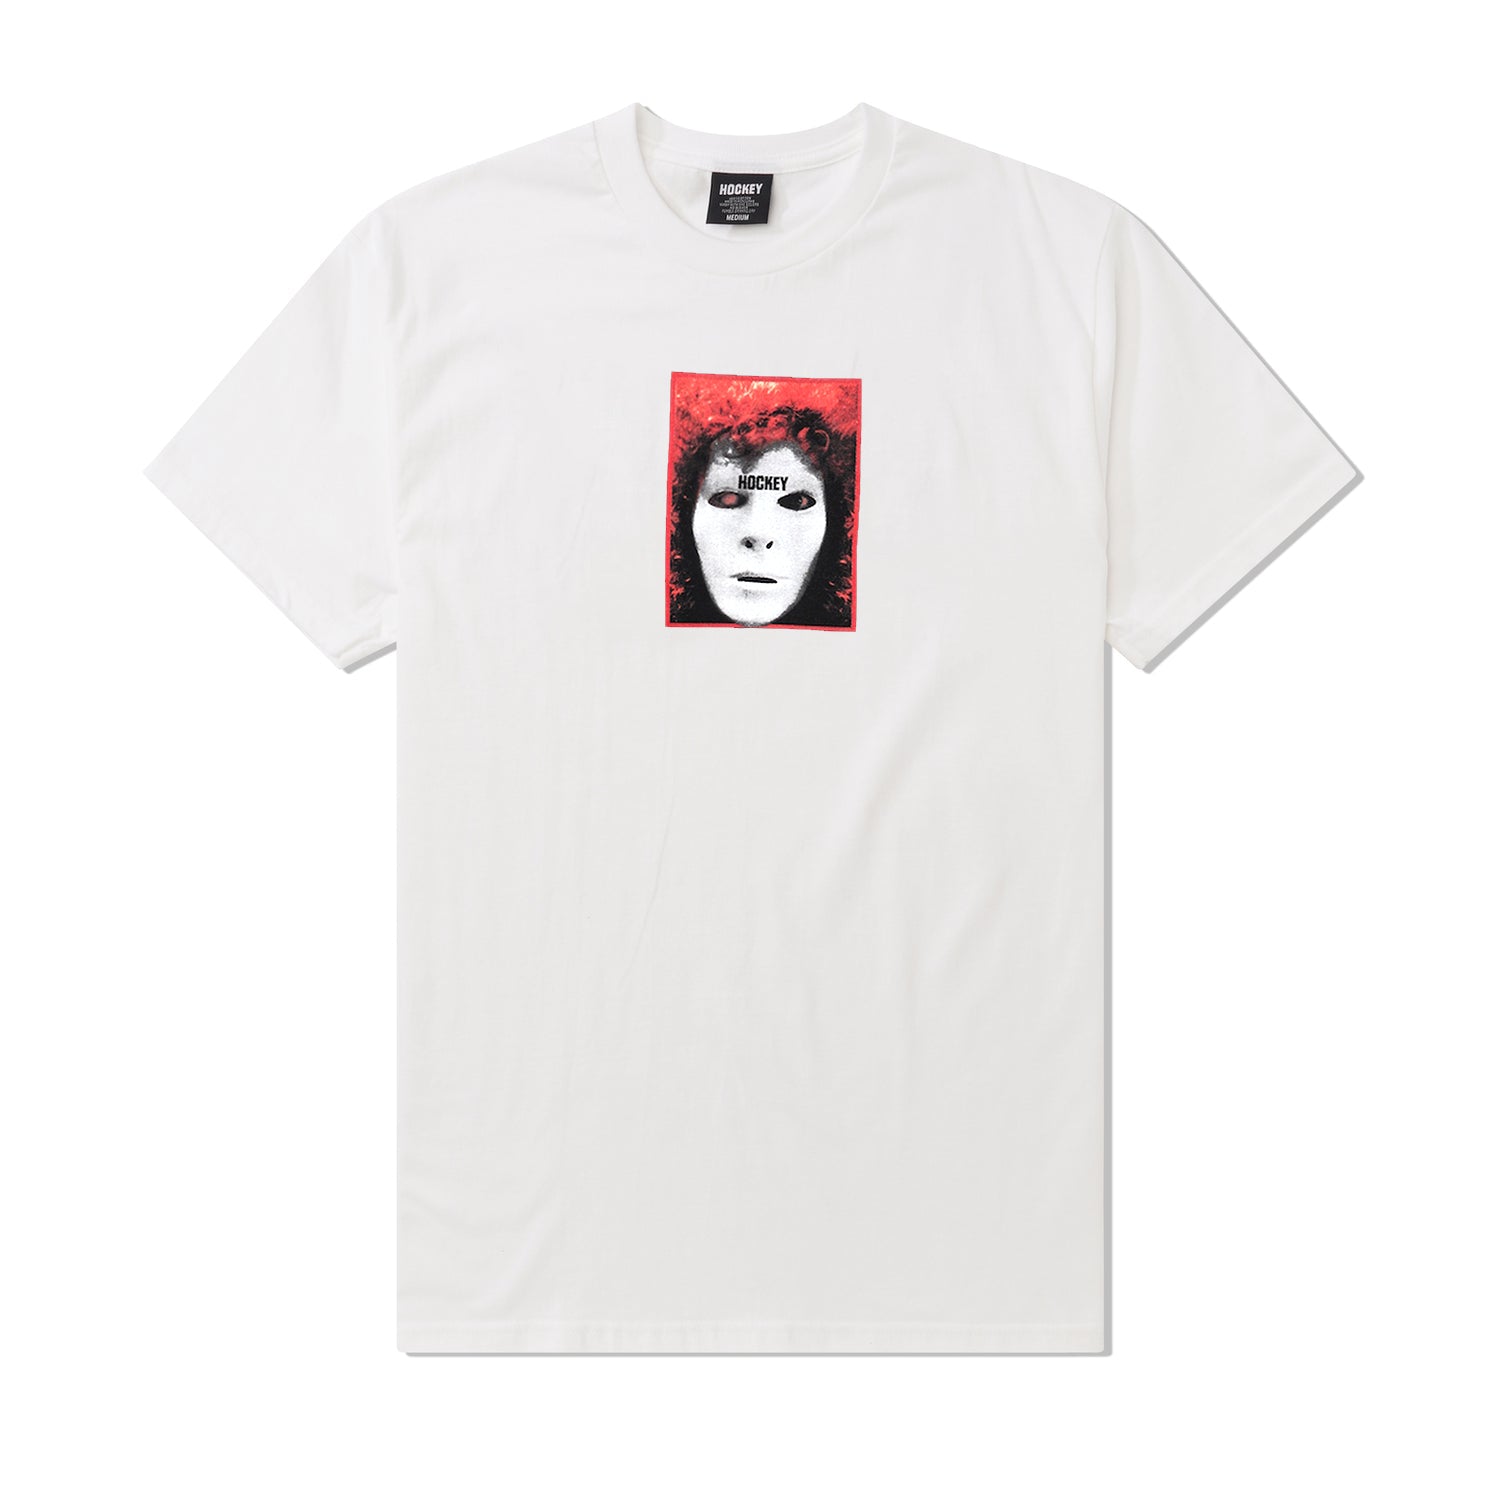 No Manners Tee, White